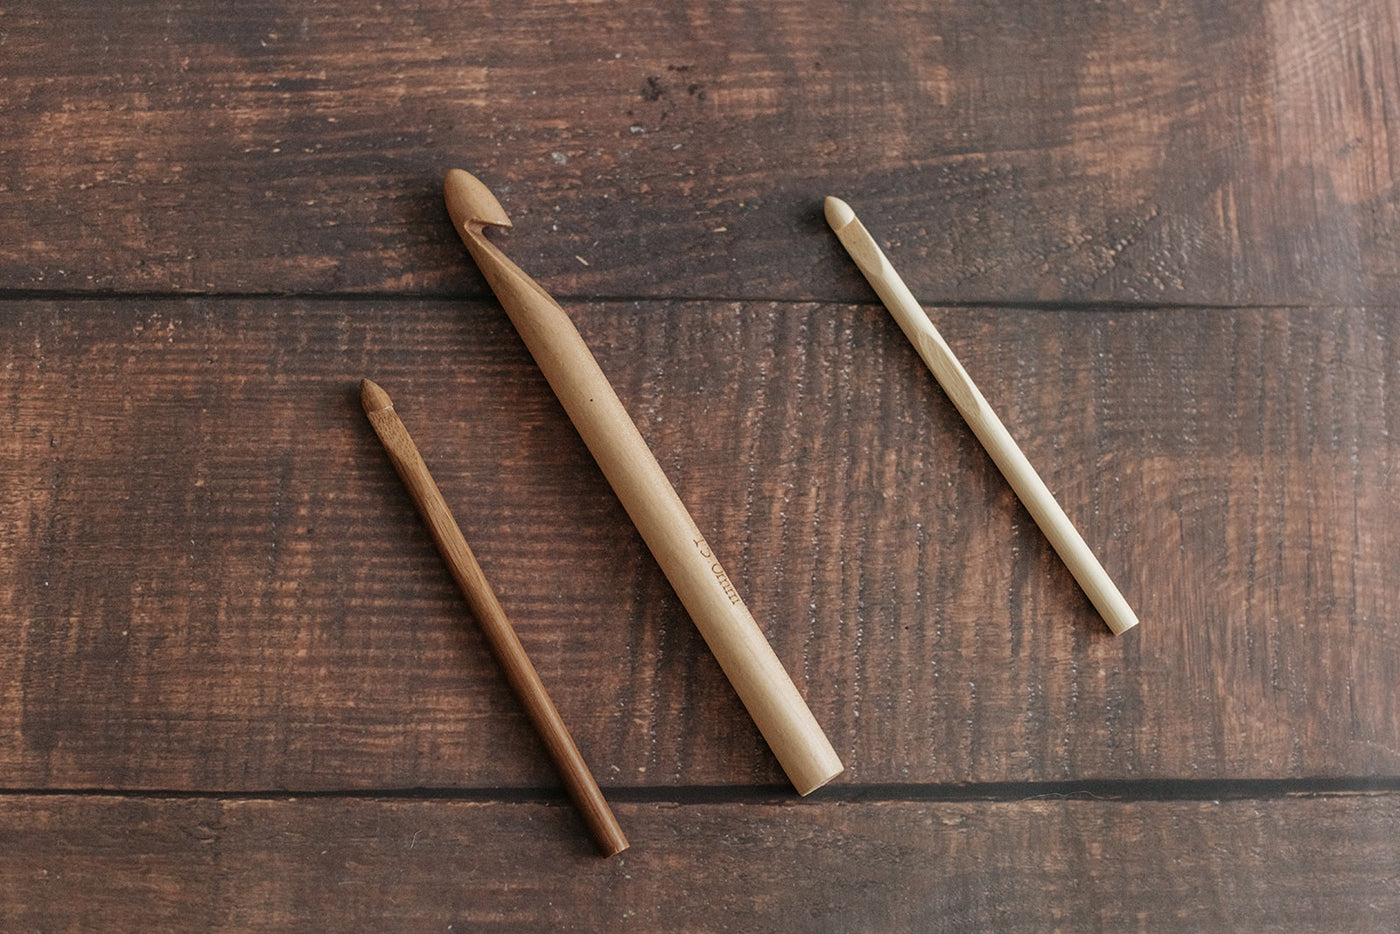 The Tools- Bamboo Hooks